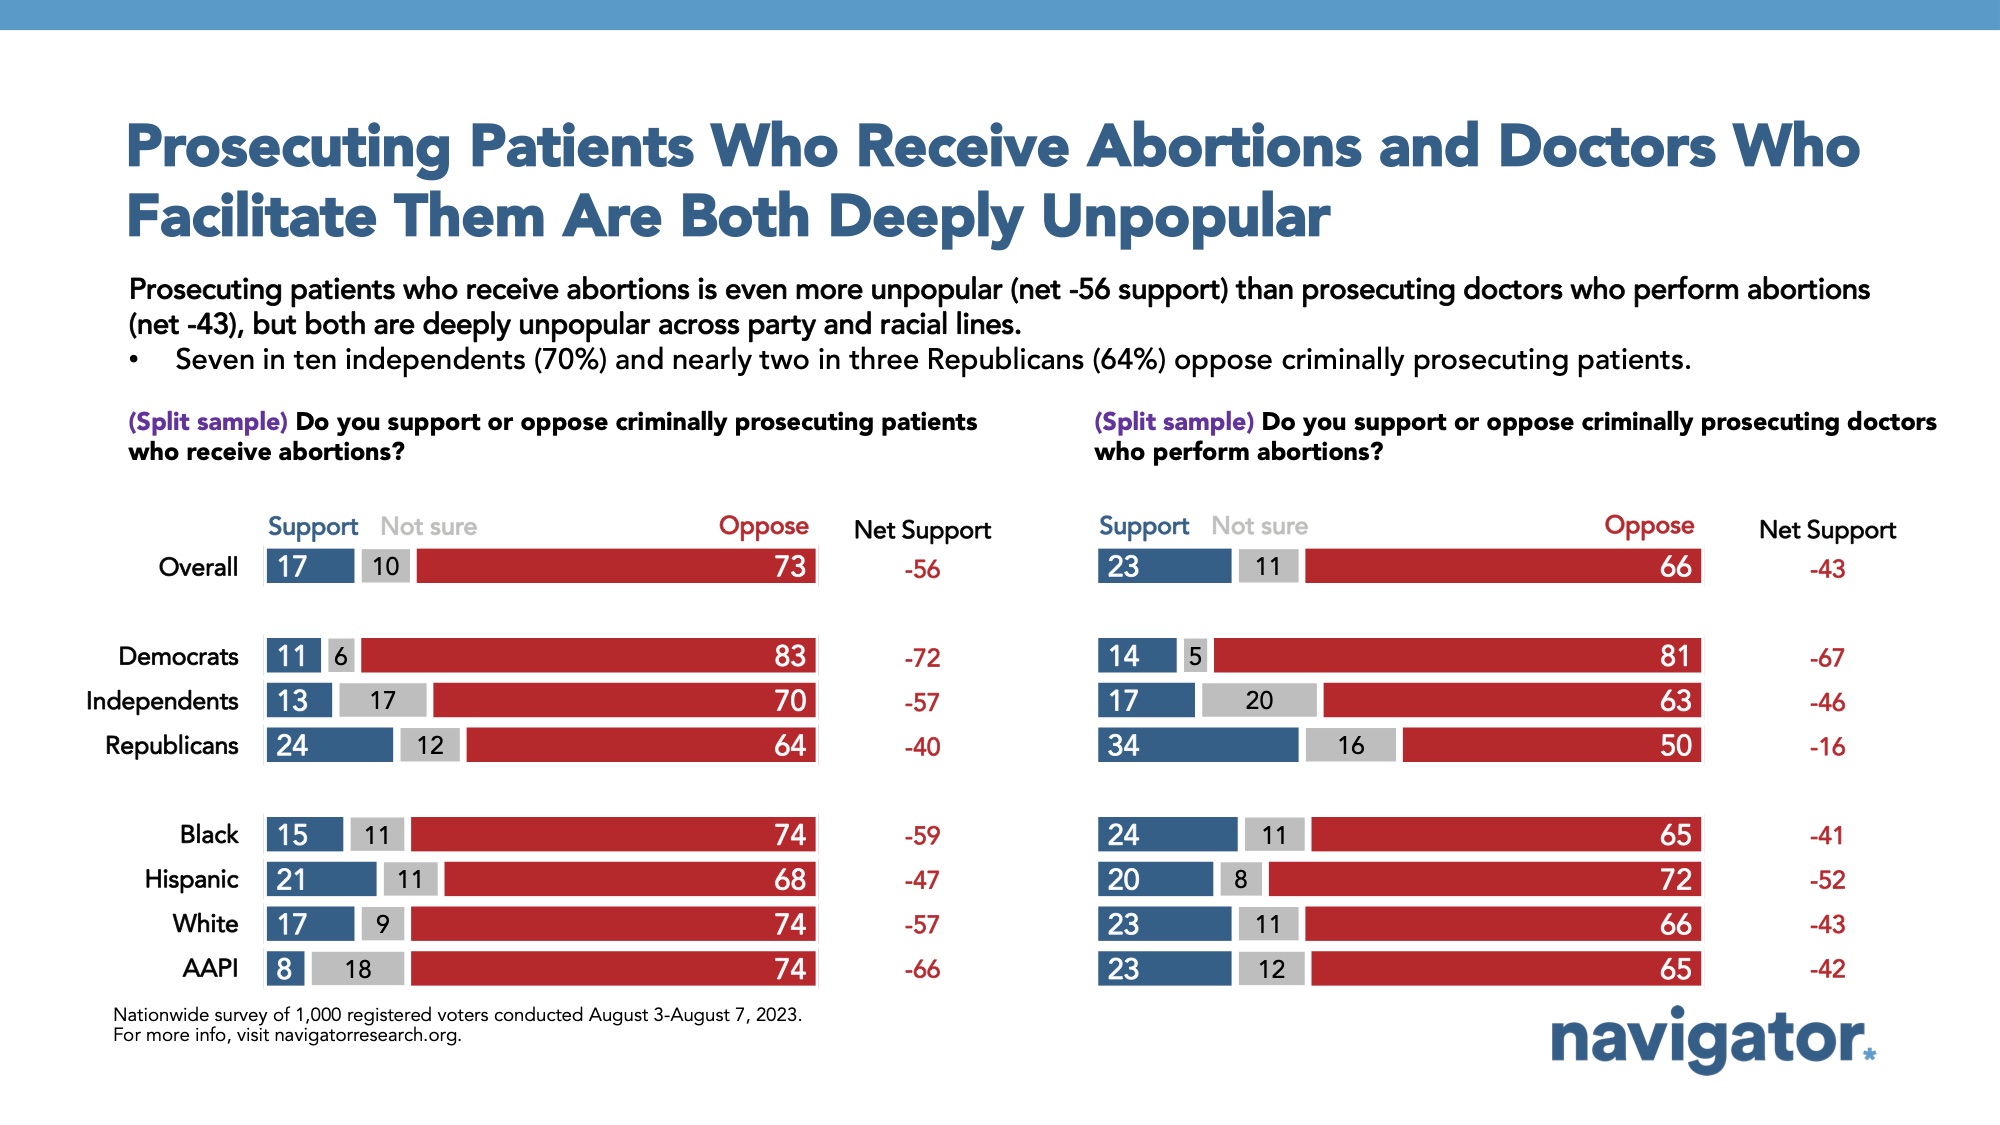 Bar graph of polling data on abortion rights. Title: Prosecuting Patients Who Receive Abortions and Doctors Who Facilitate Them Are Both Deeply Unpopular